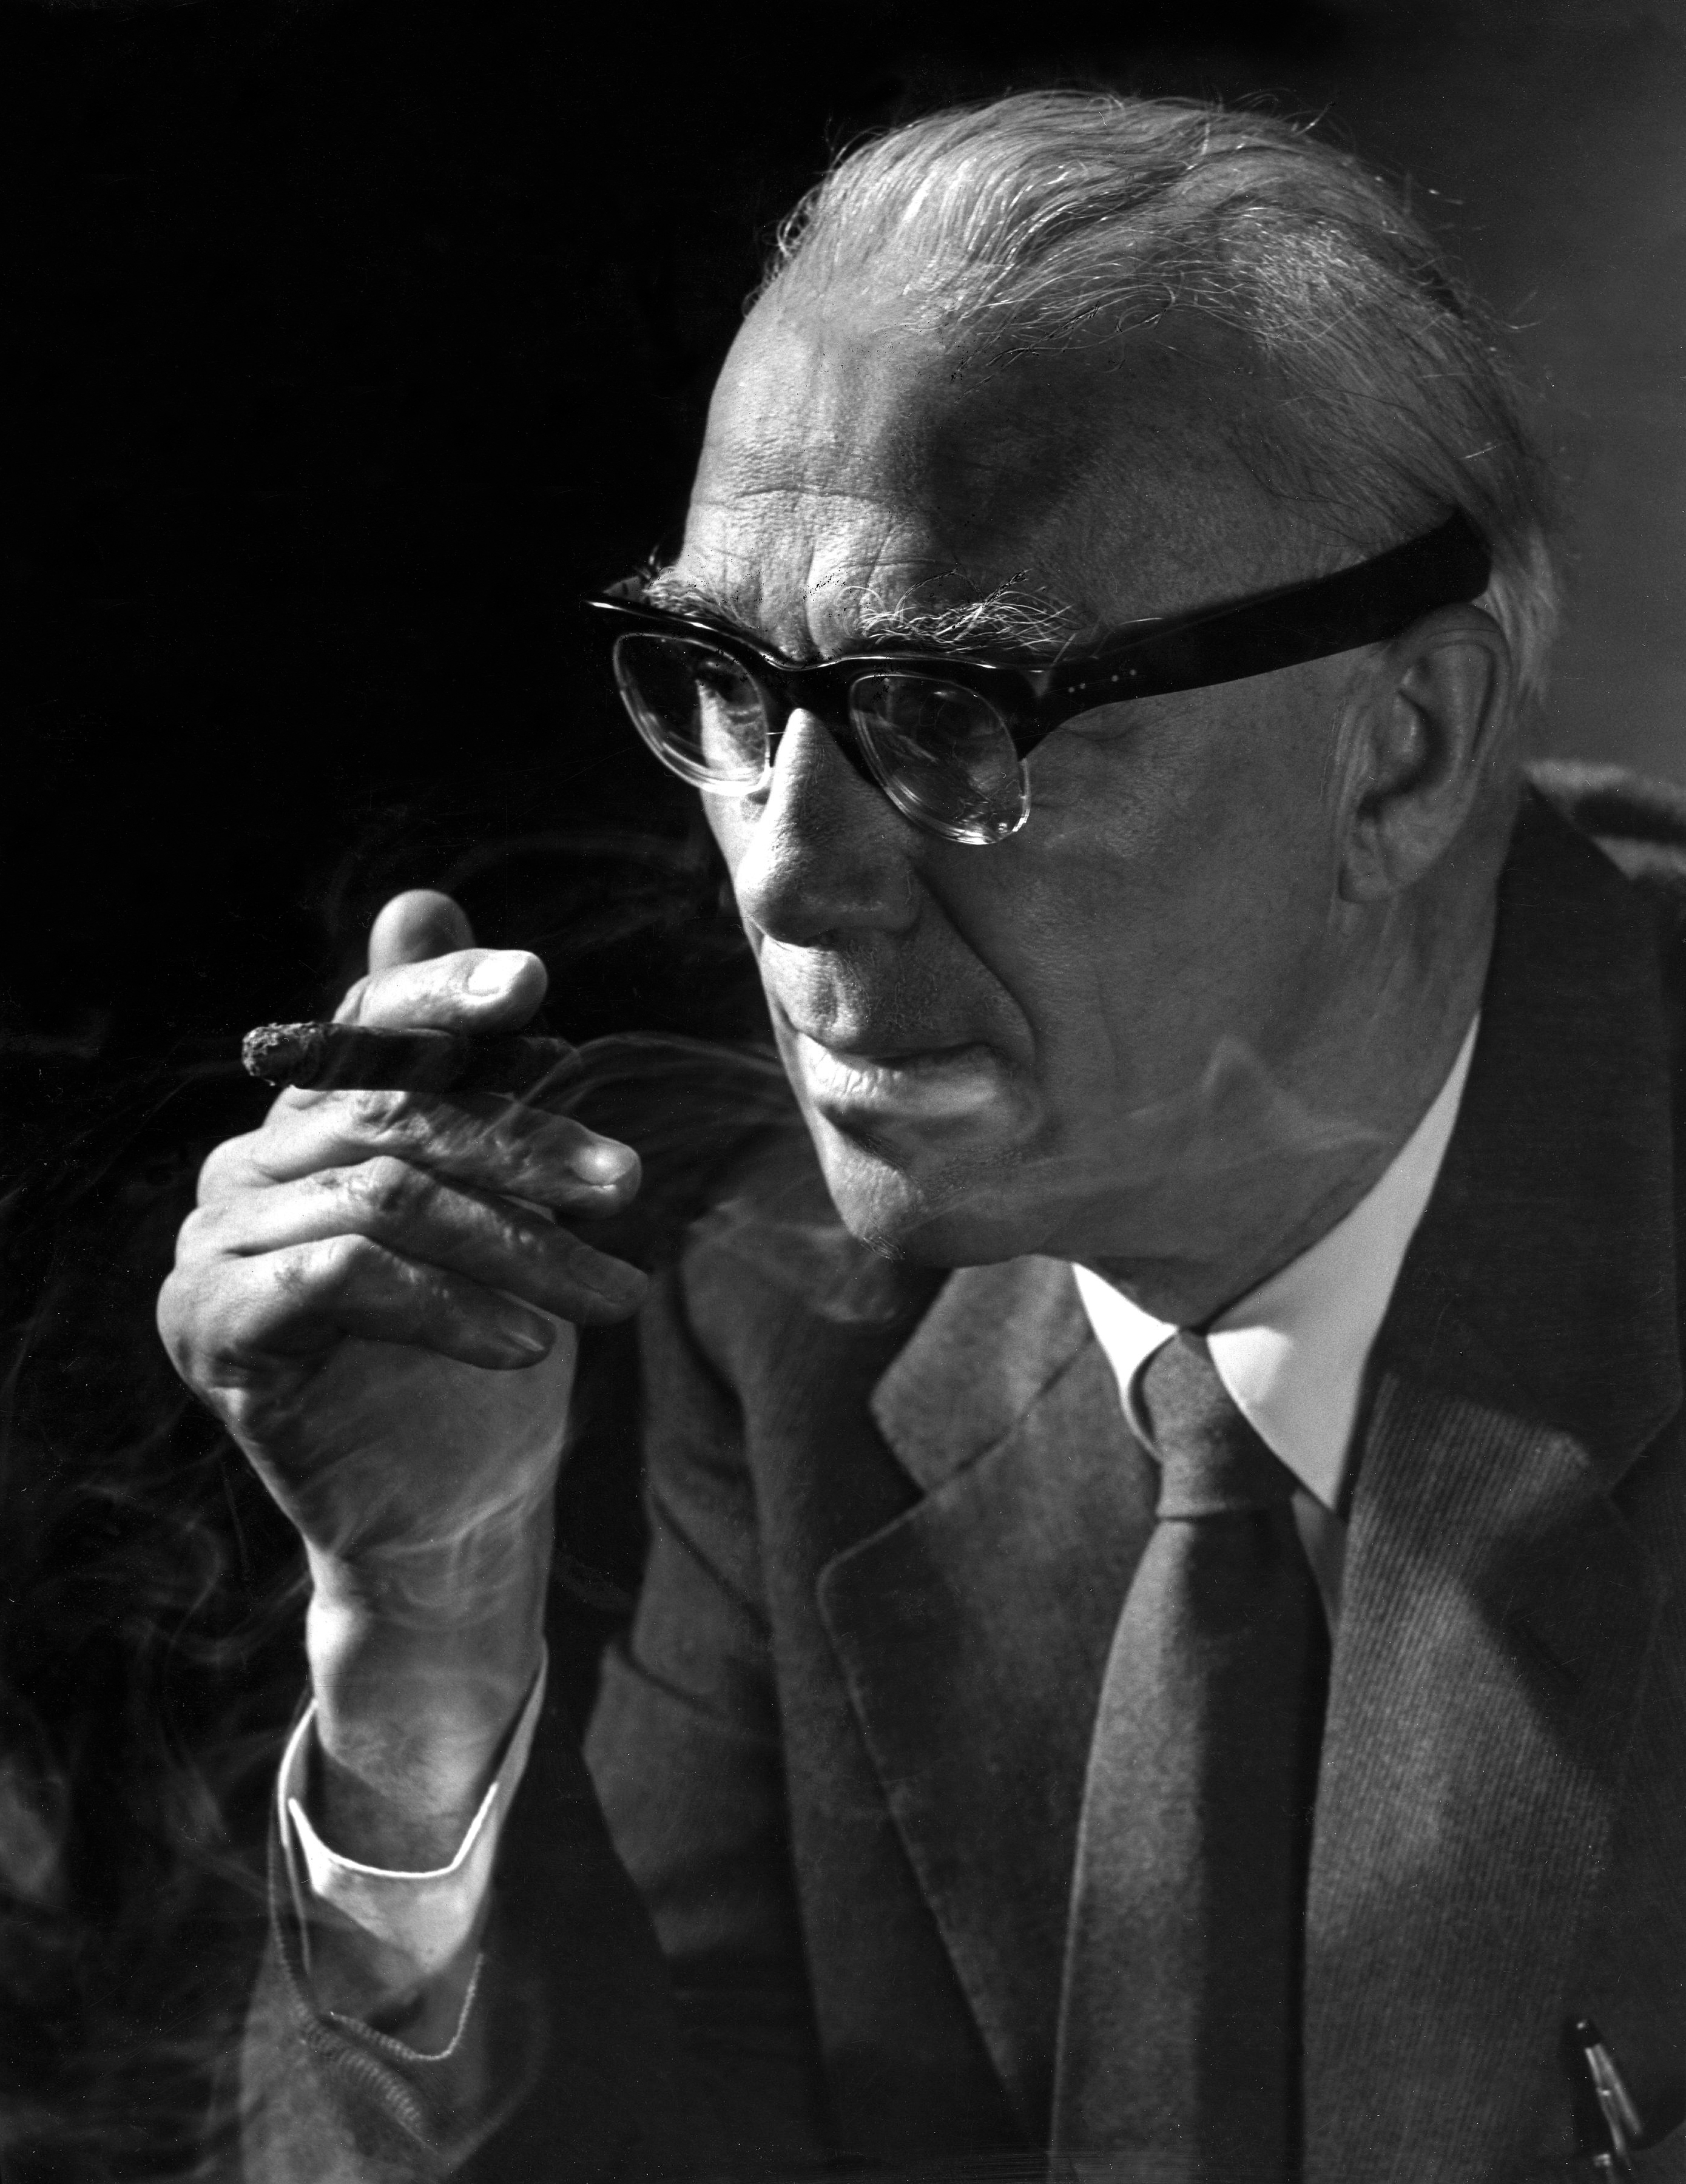 A person wearing glasses, in a suit and tie smoking a cigar.